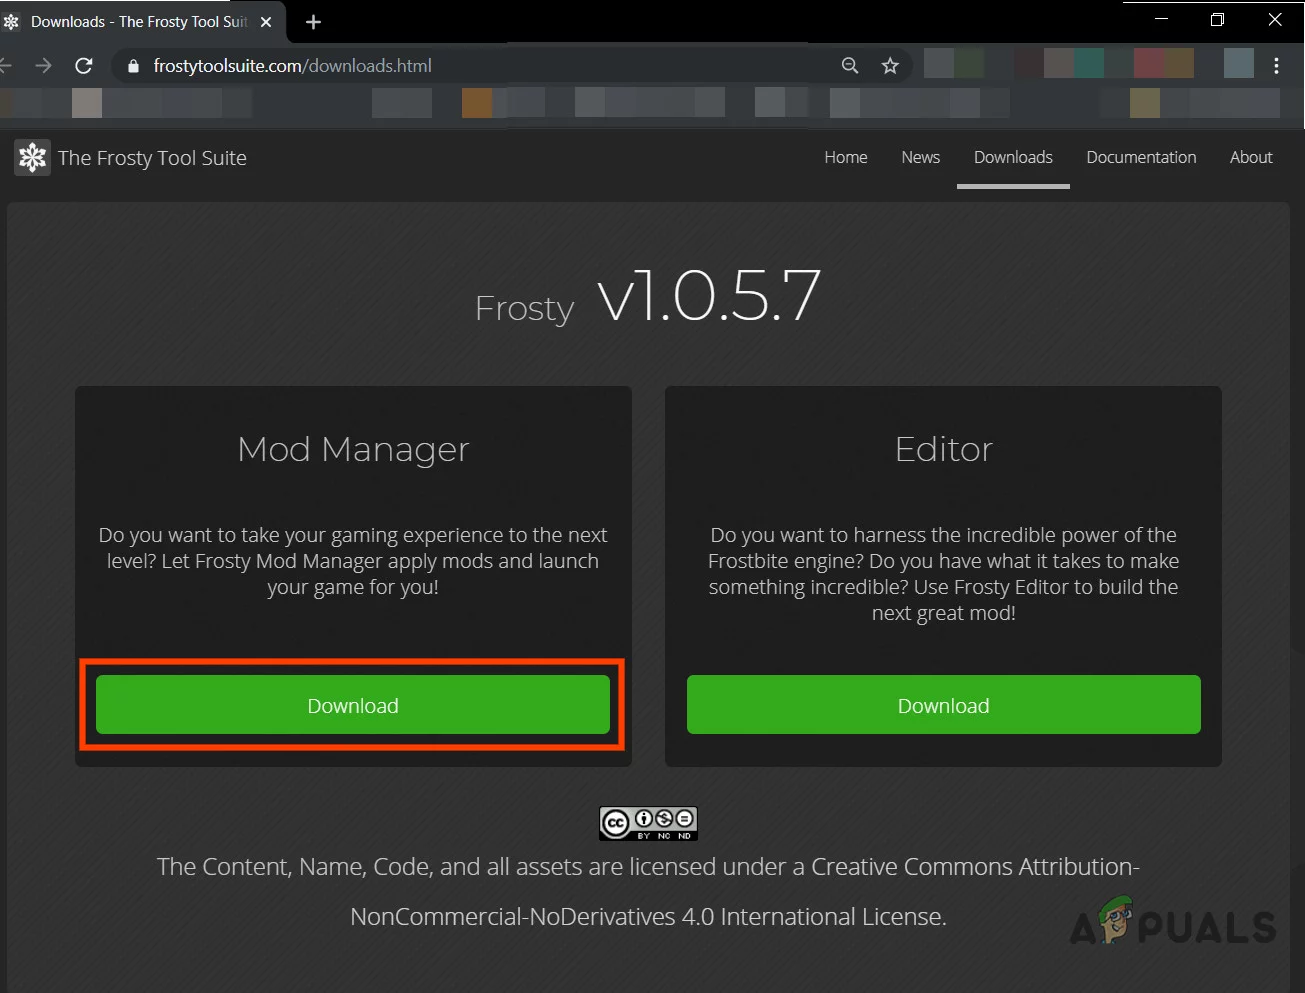 Frosty Mod Manager. Mod Manager Frostbite. Как установить Frosty Mod Manager. New installation detected Frosty Mod Manager. Launch game using